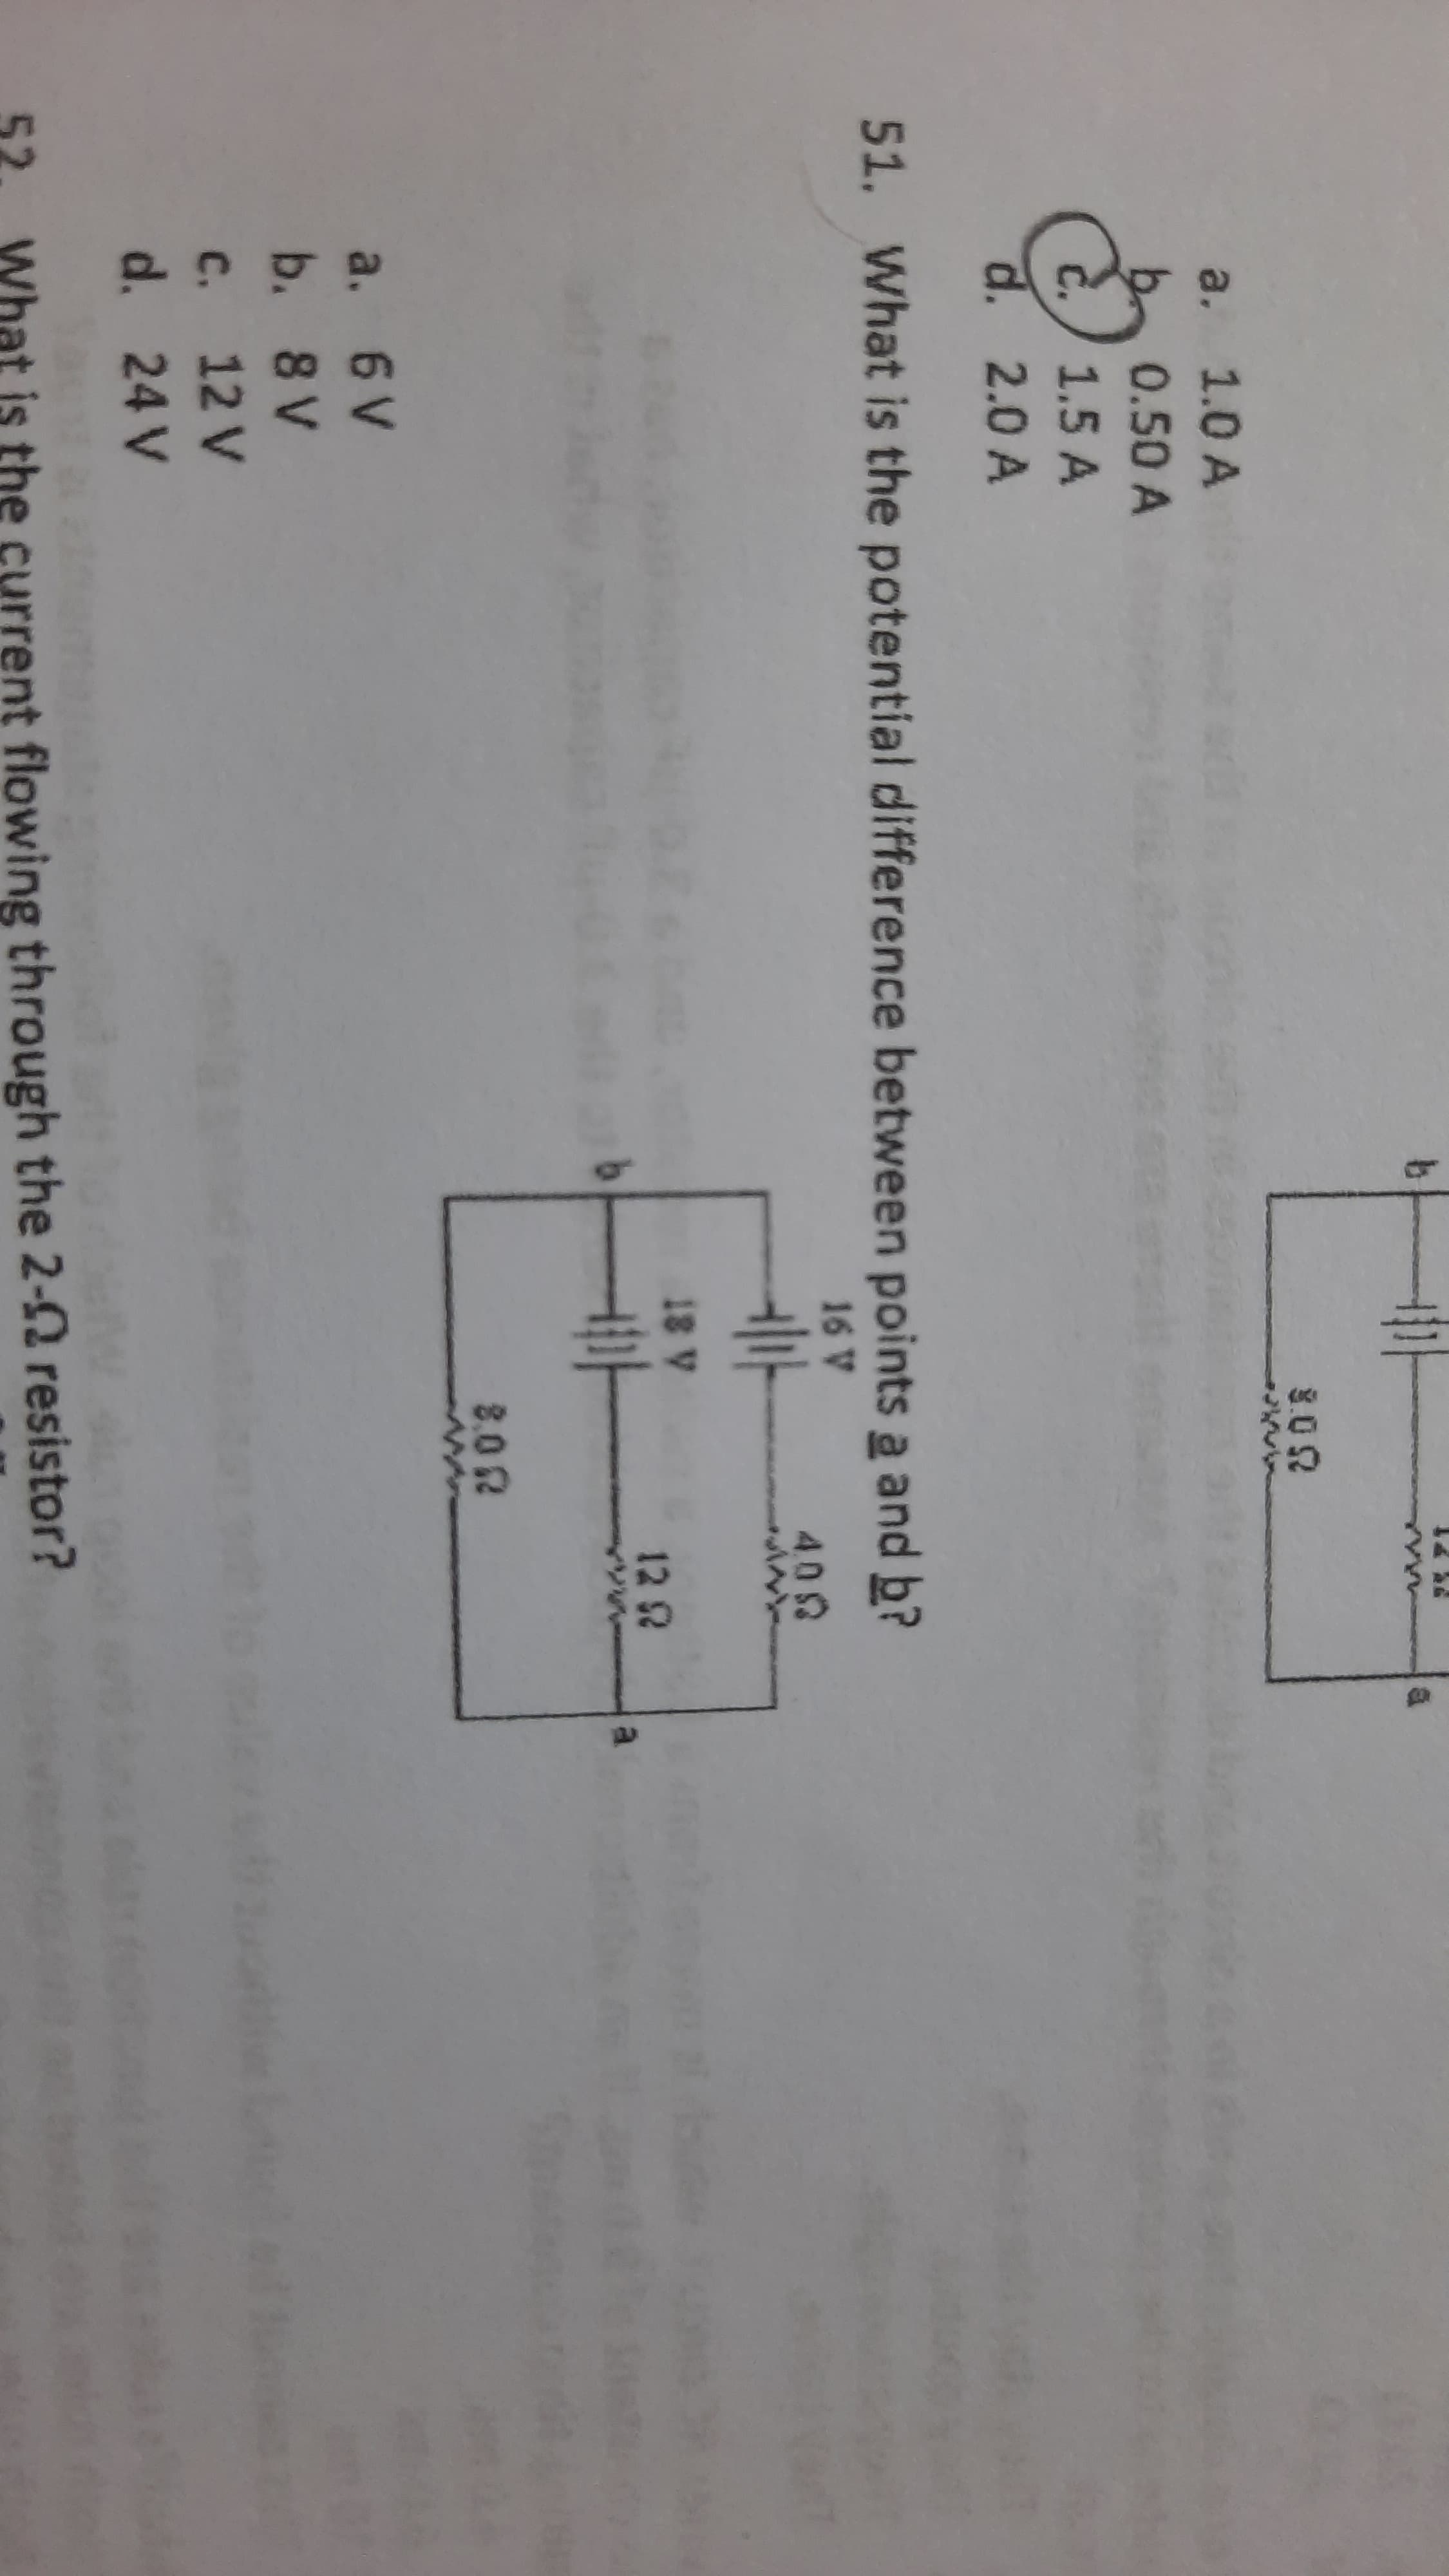 51. What is the potential difference between points a and b?
16 V
402
18 V
12 2
a.
8.0 2
a. 6V
b. 8 V
C. 12 V
d. 24 V
